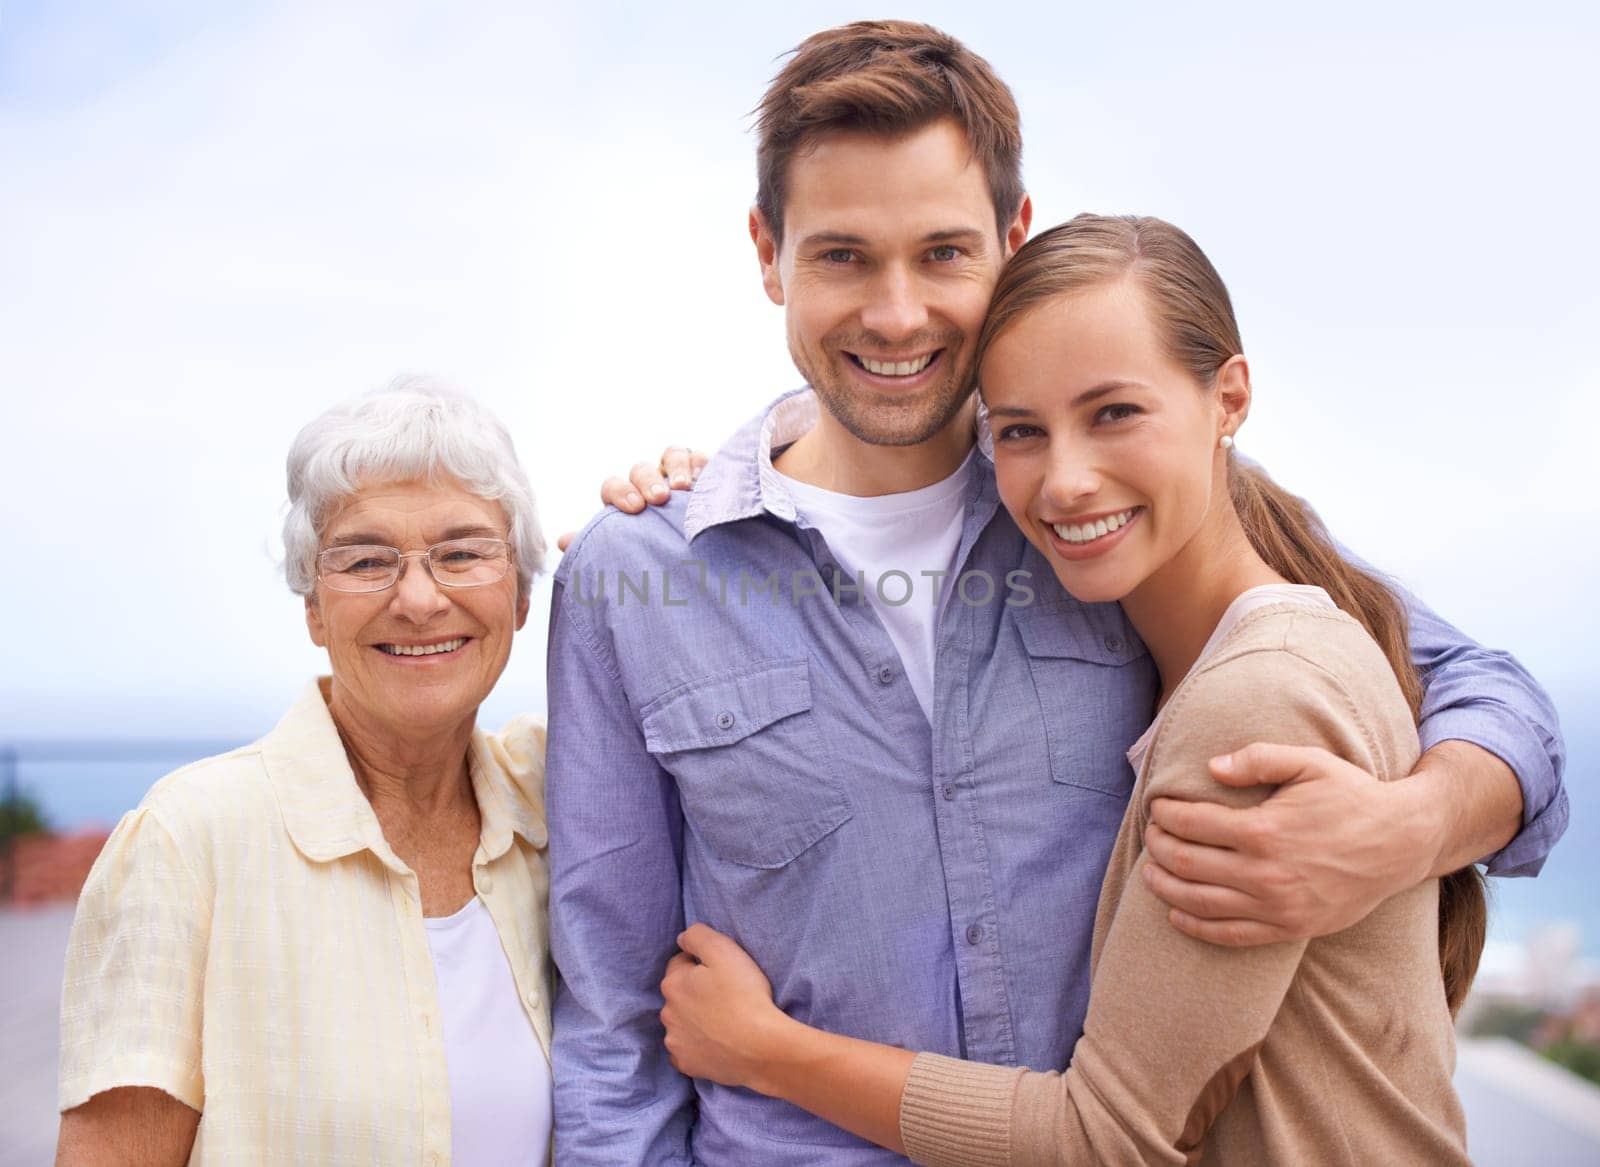 Happy, family and portrait of mother with couple, husband and wife. Embrace and smiling with love and joy for senior woman at outdoor with bonding on a peaceful day for reunion and affection by YuriArcurs